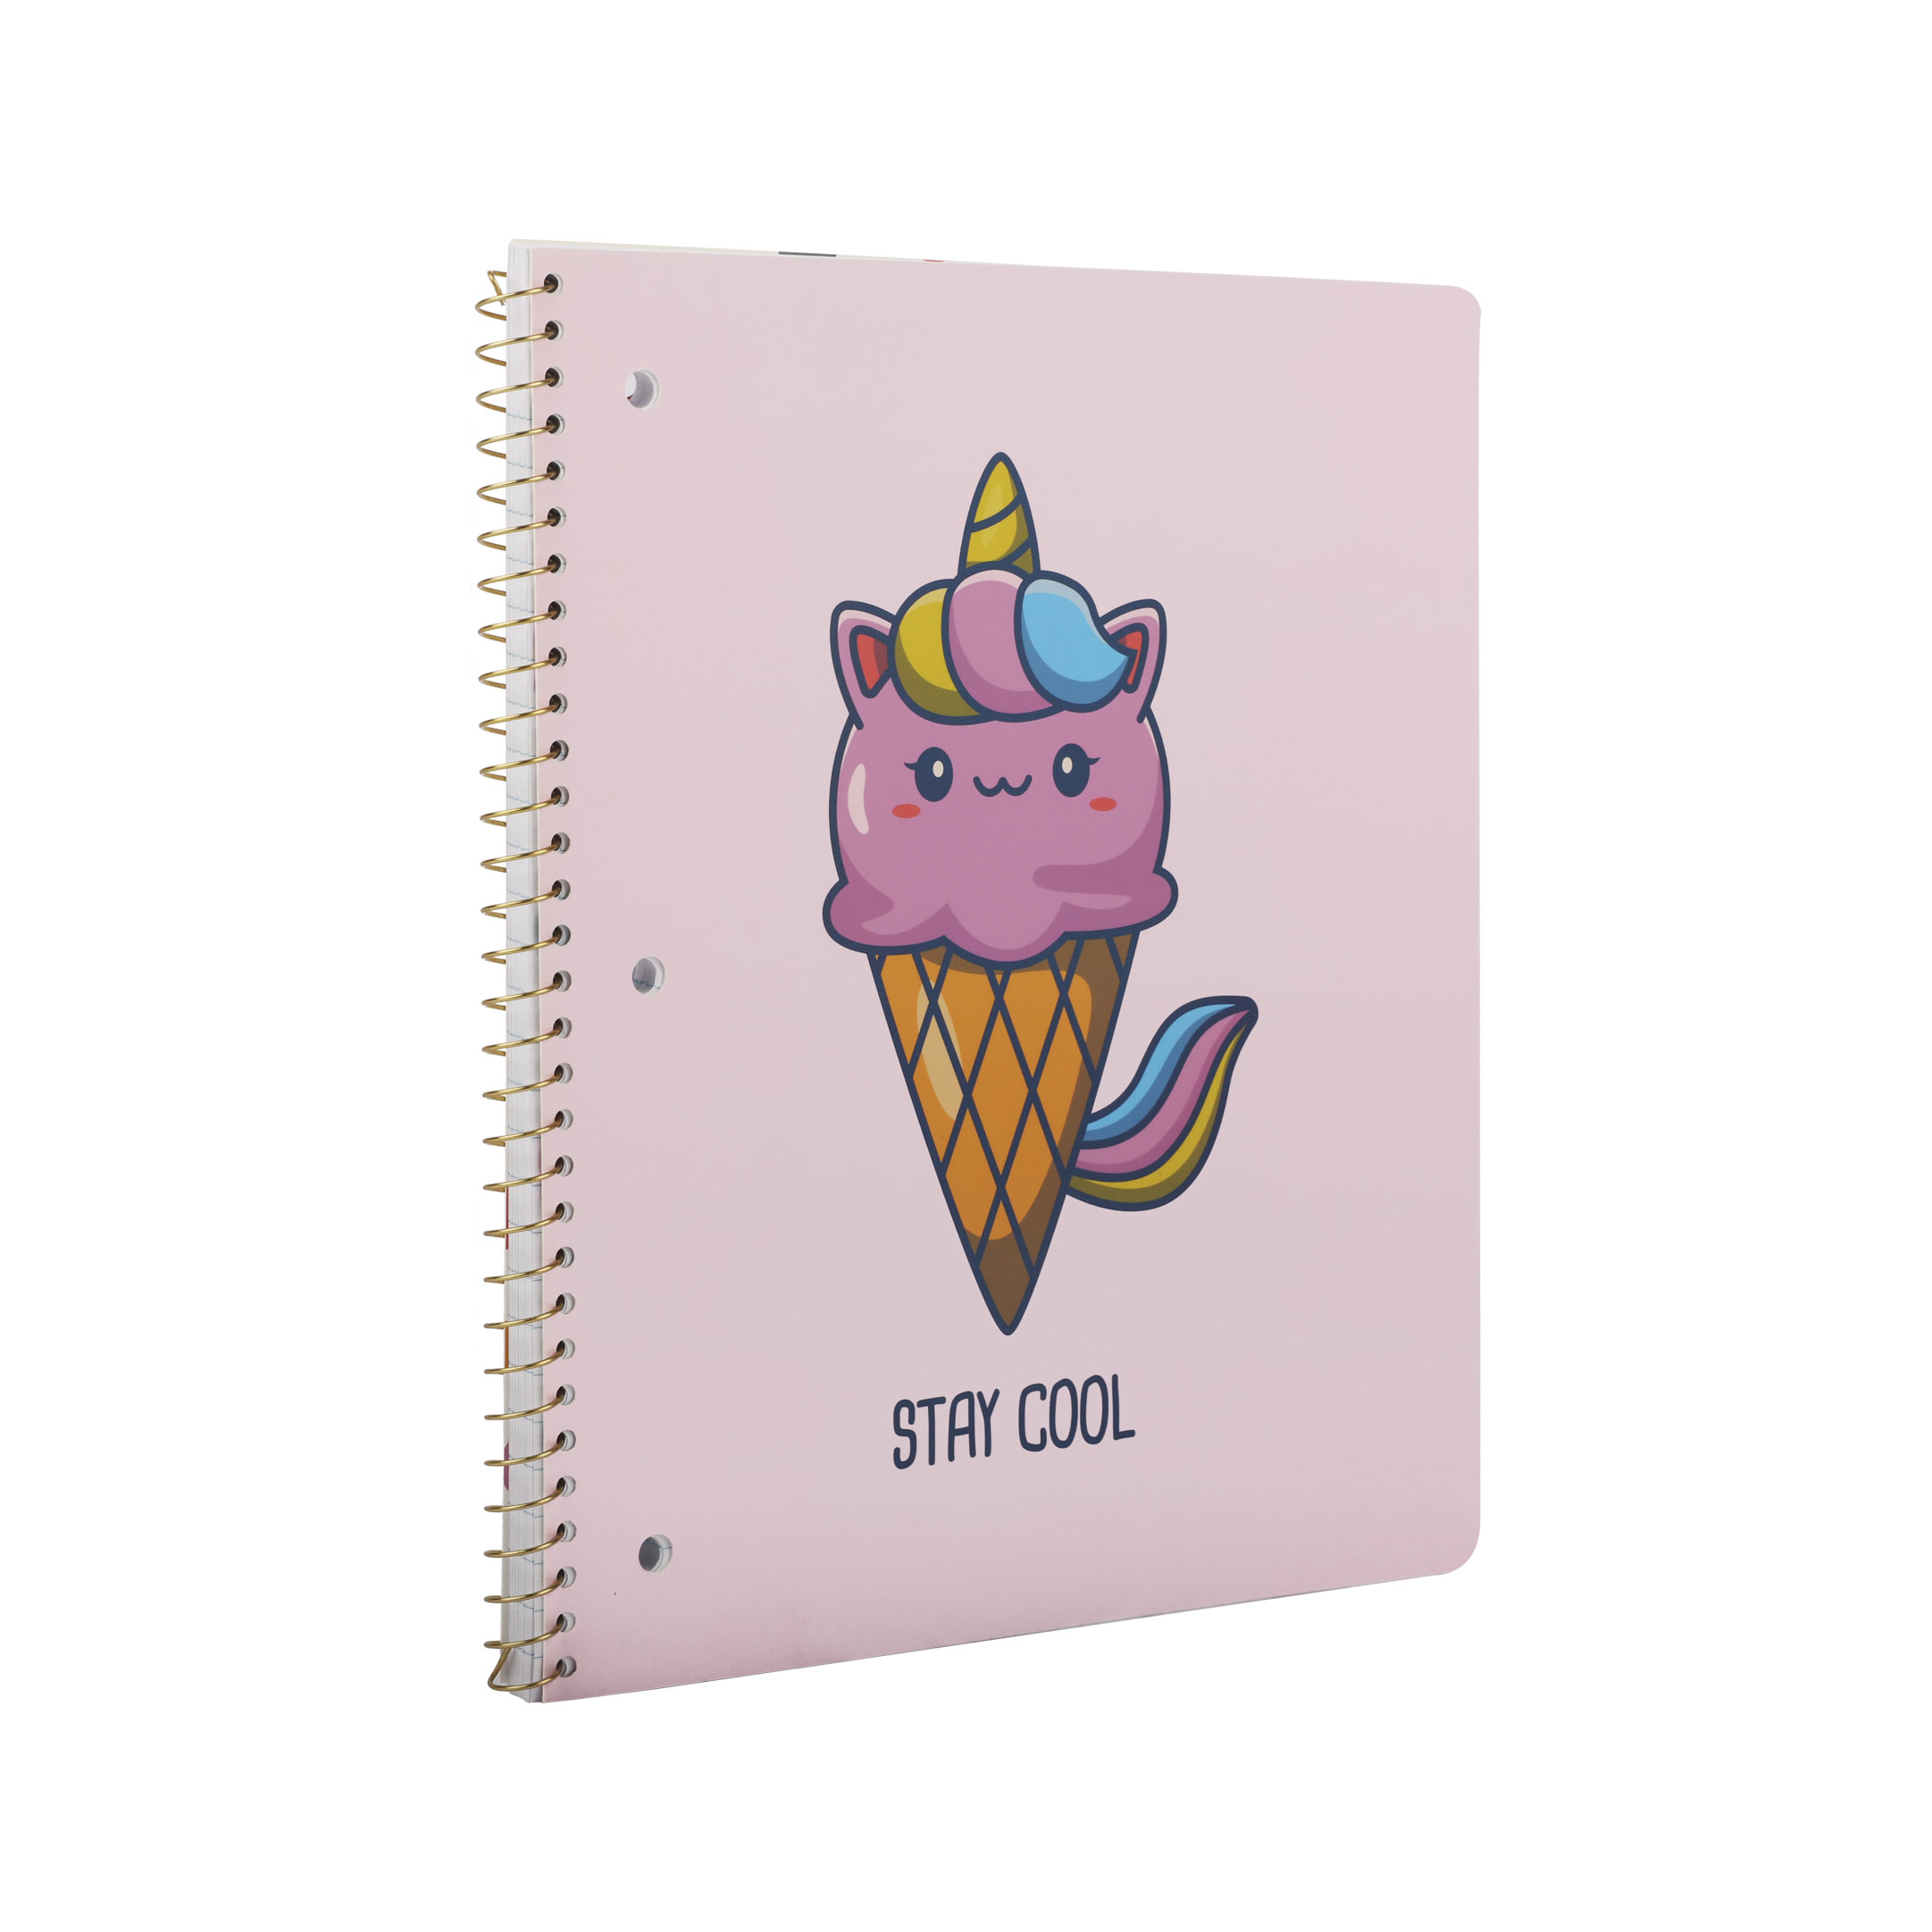 Pen+Gear 1 Subject Spiral Notebook, Wide Ruled, 80 Sheets, Stay